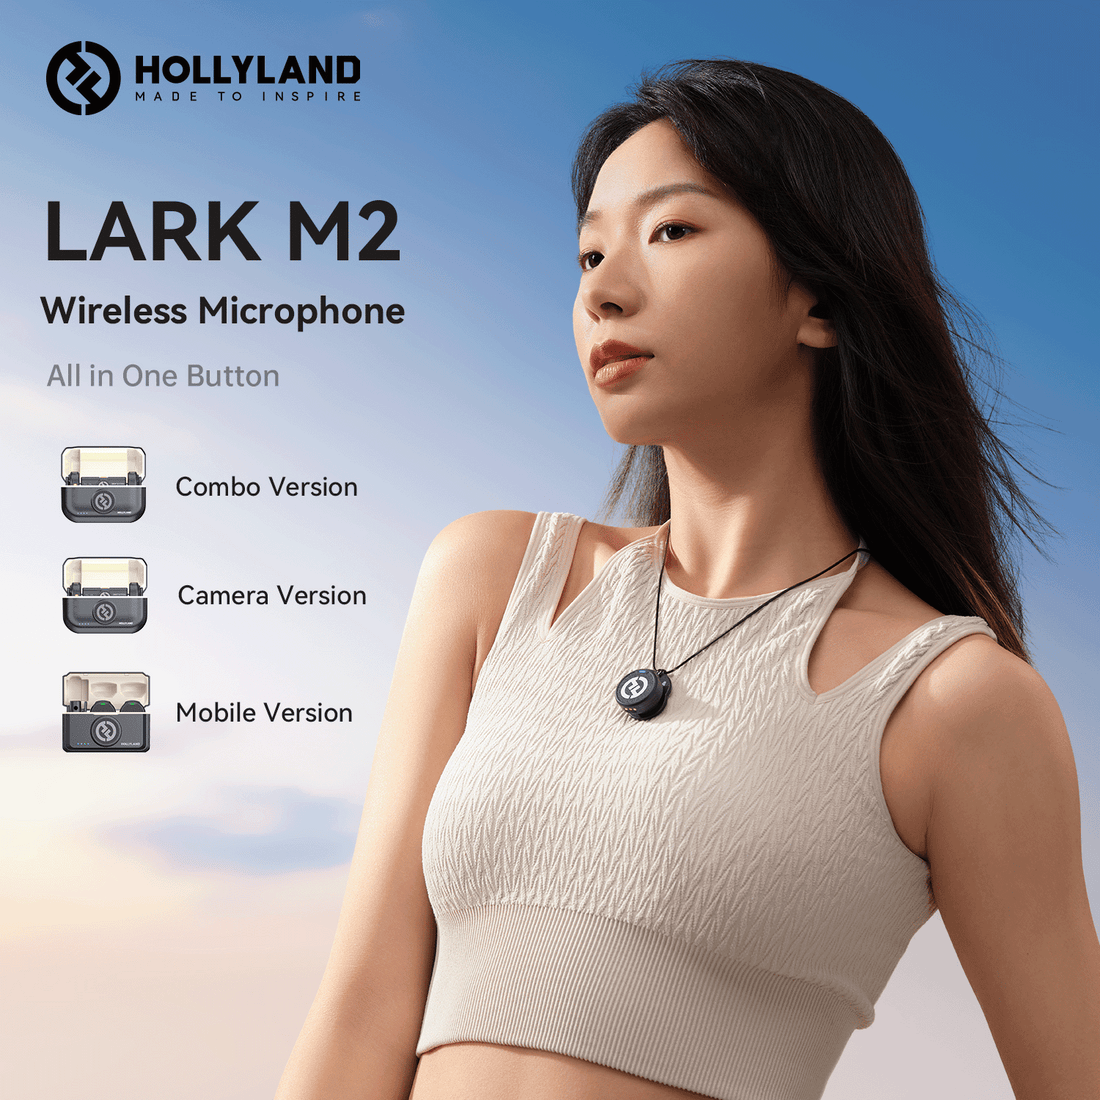 Hollyland introduces the Wireless Lavalier Microphone LARK M2